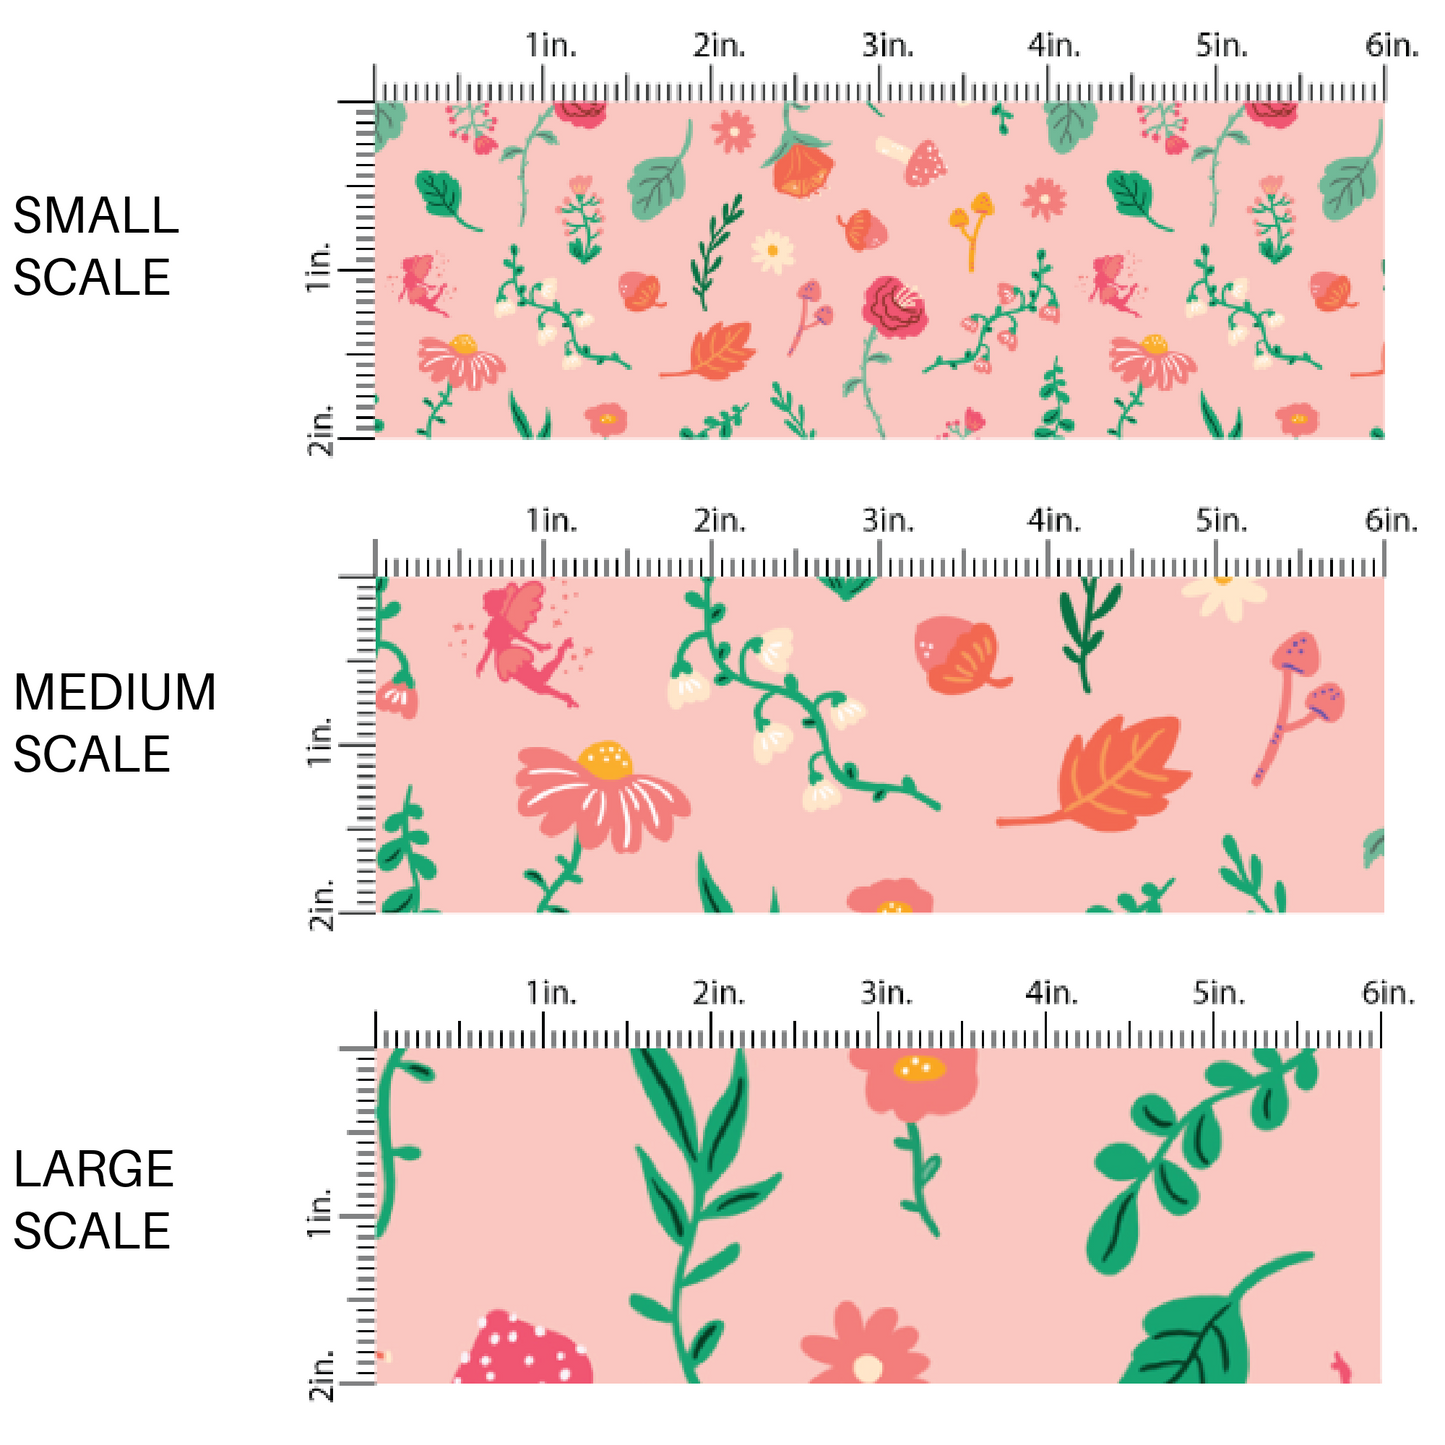 Multi-Colored Florals and Pink Mushrooms on Pink Fabric by the Yard scaled image guide.